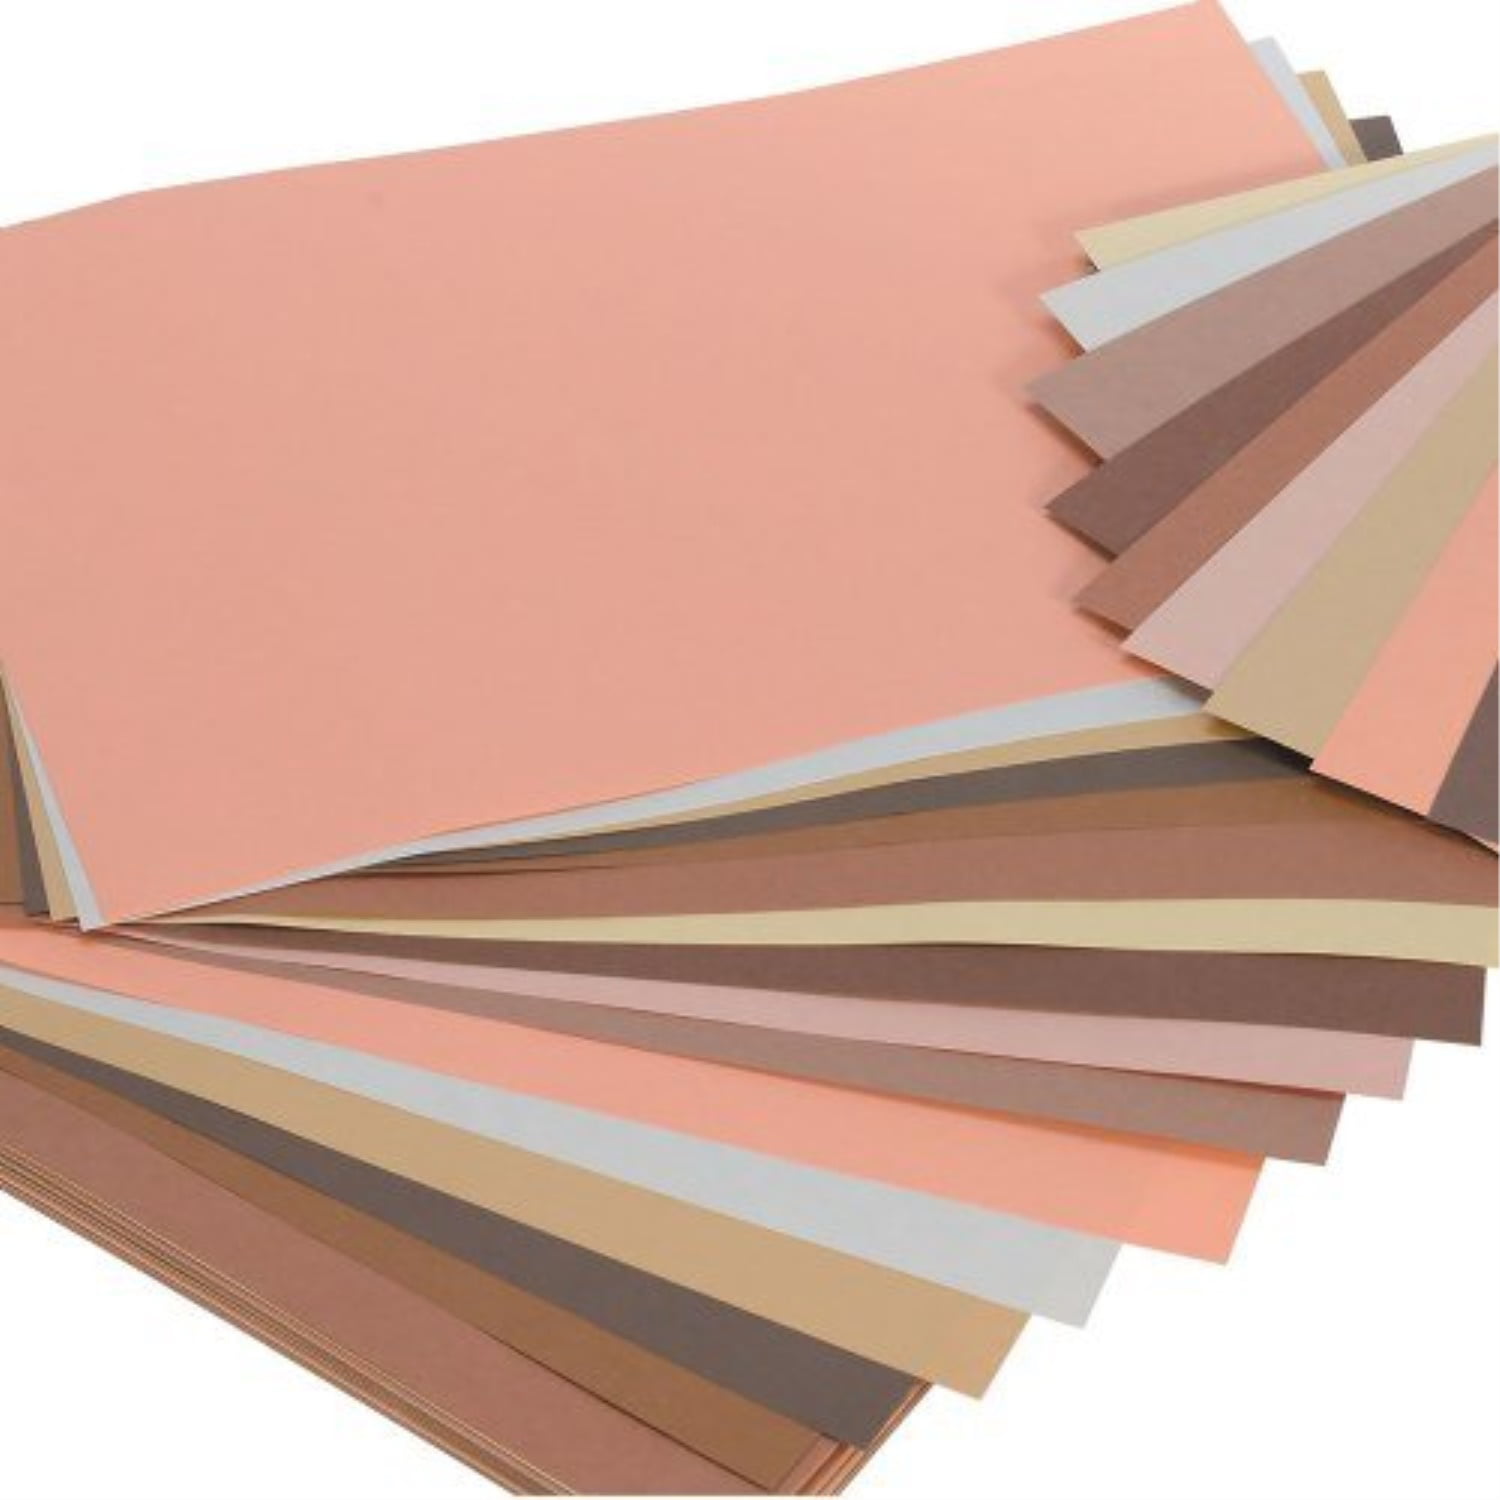 50 Sheets 9 x 12 10 Skintone Hues Set of 3 Multicultural Construction Paper 